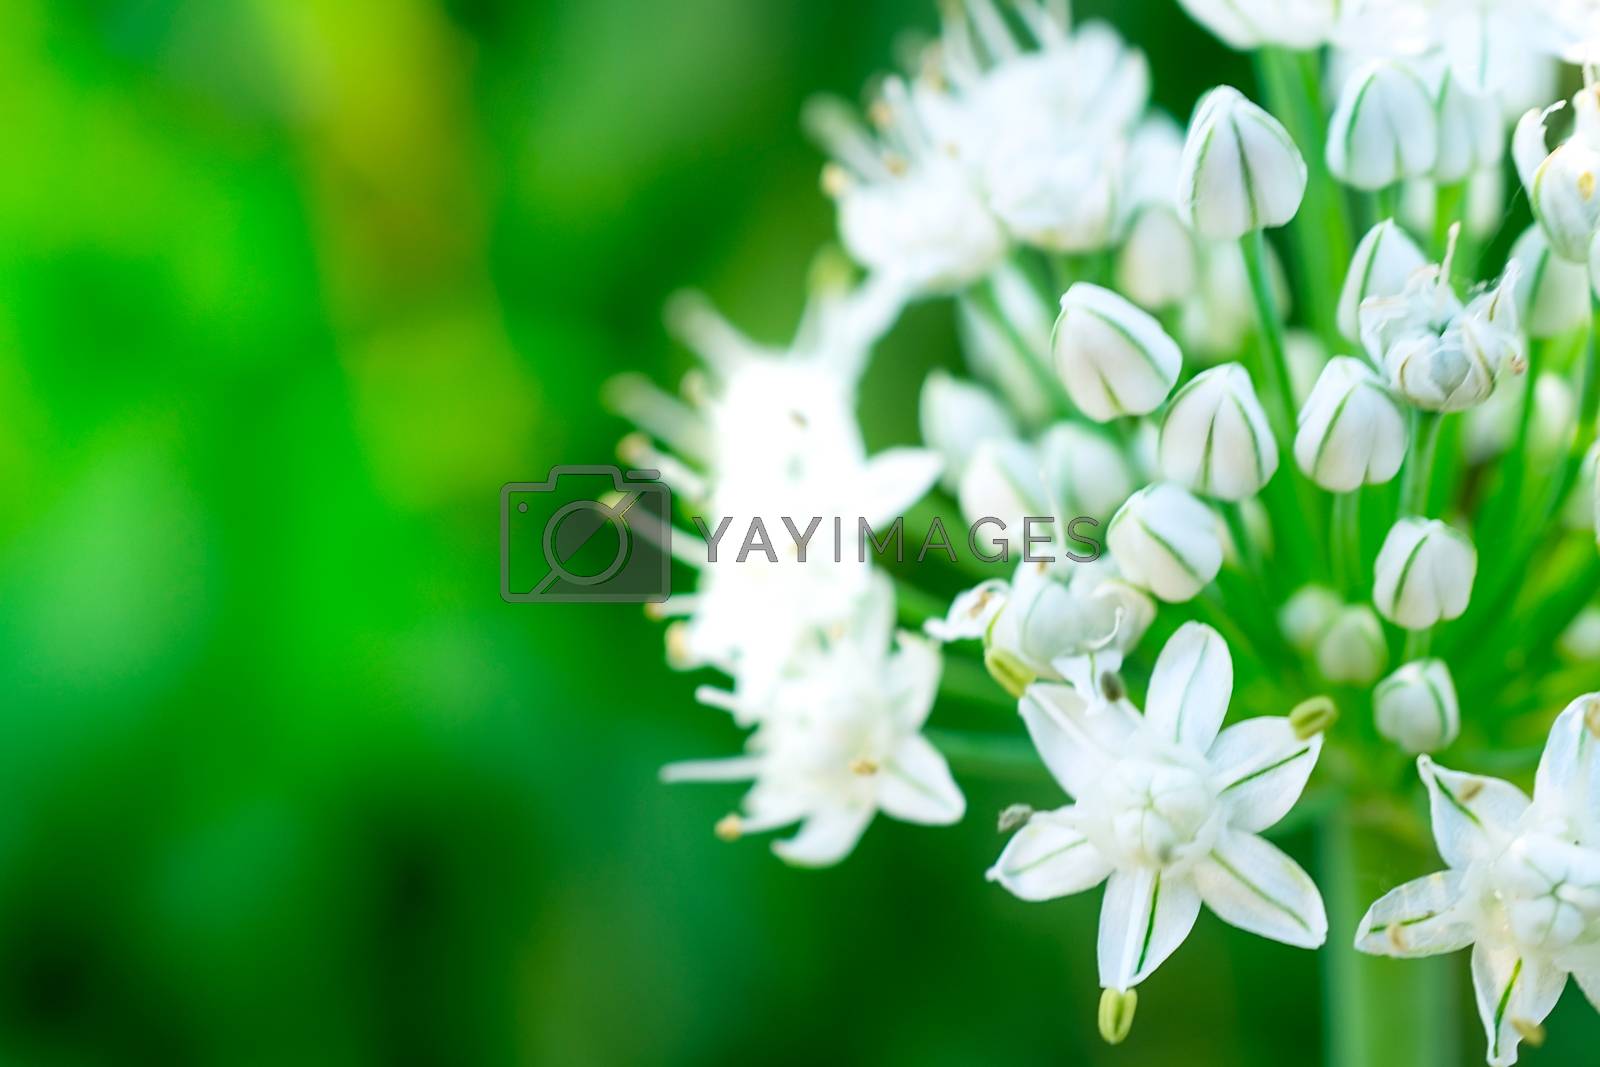 Royalty free image of green onions close up on background by gukgui